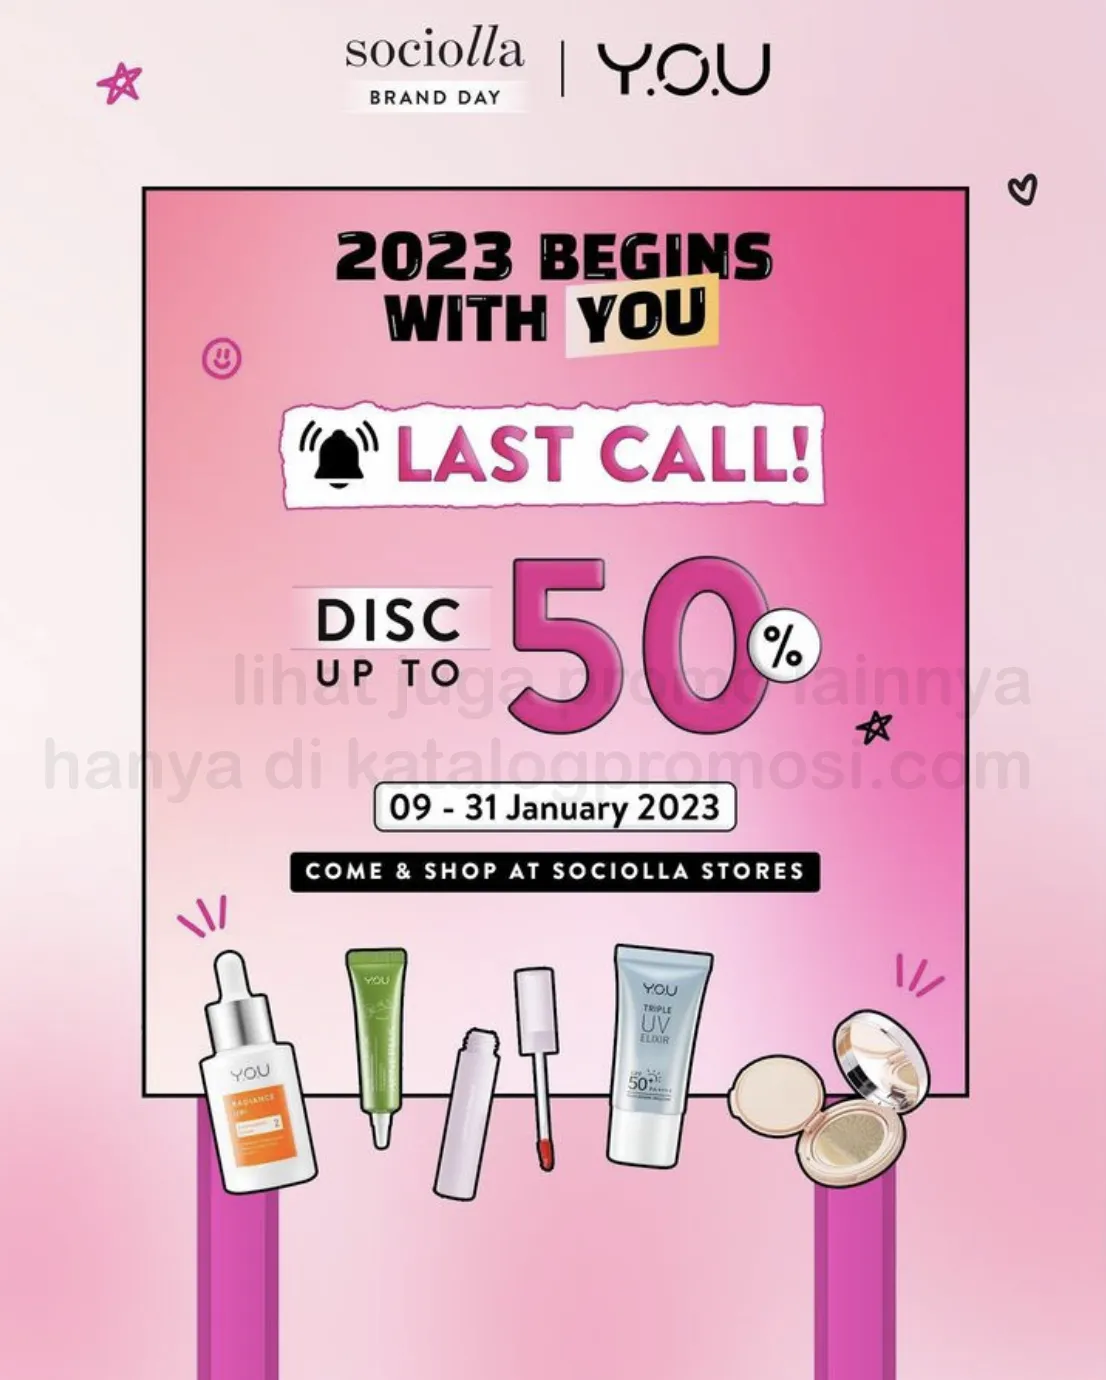 Promo Sociolla Super Brand Day - 2023 Begins With YOU | DISCOUNT up to 50% off